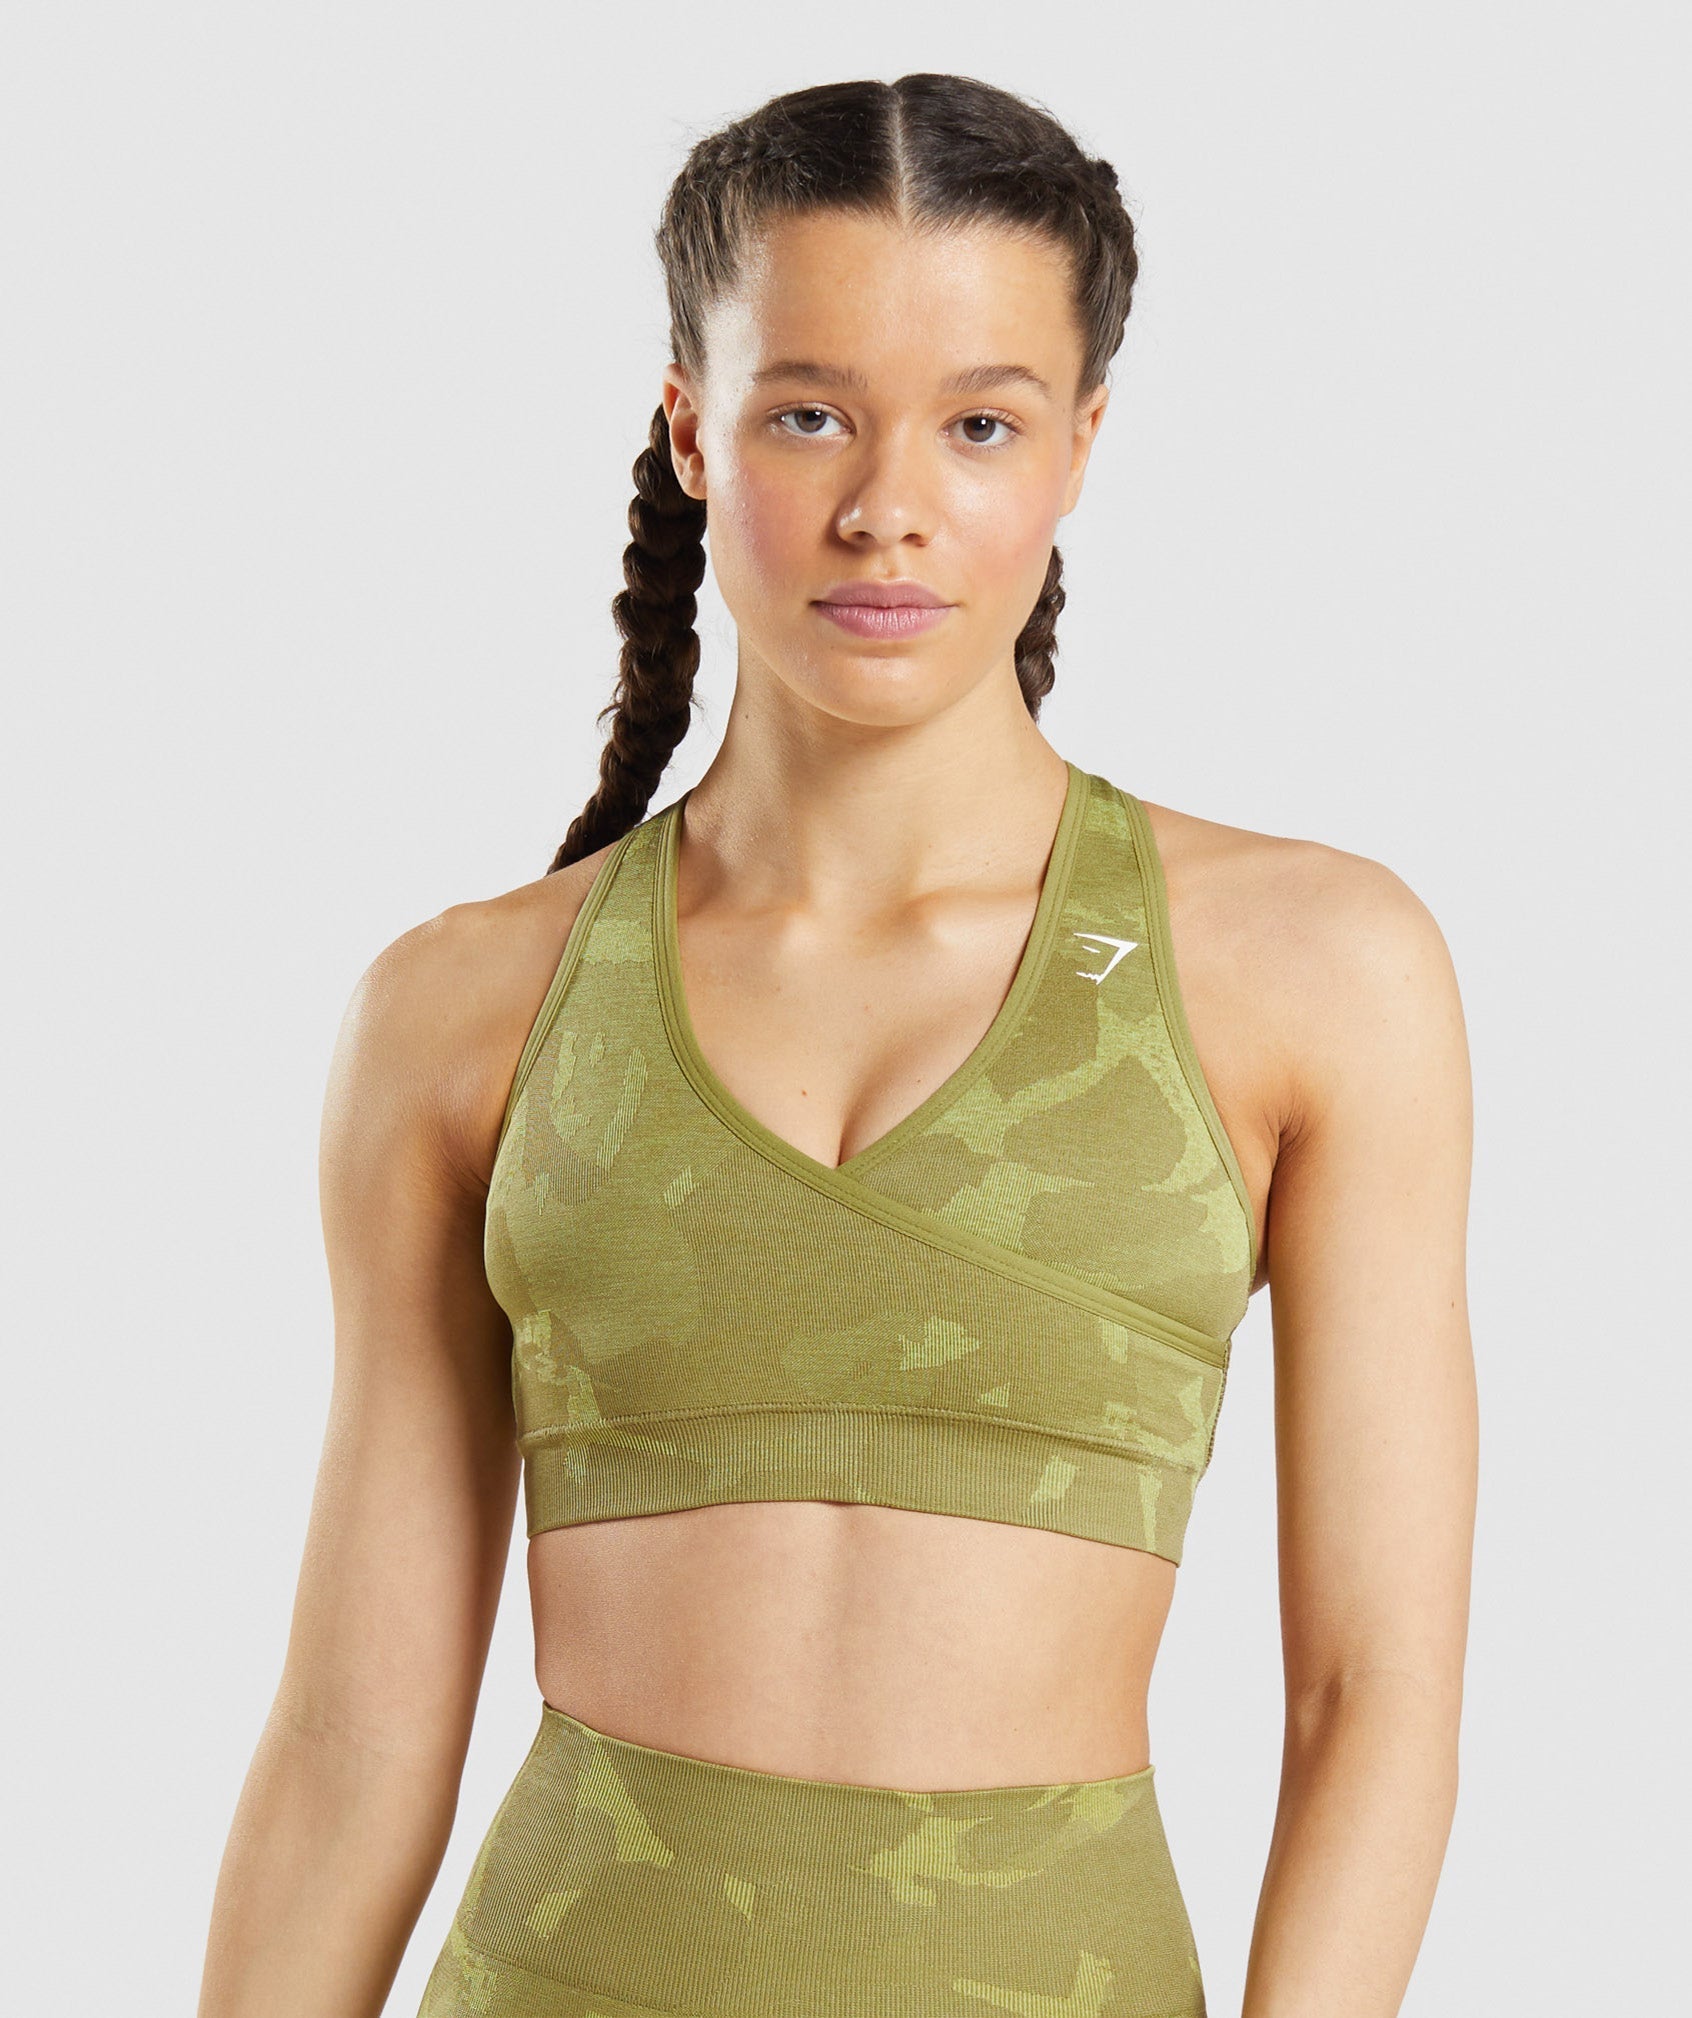 prAna Everyday Support Bra - Women's, Heather Grey, — Bra Size: Extra  Small, Apparel Fit: Fitted, Age Group: Adults, Apparel Application:  Everyday — 1970291-020-XS — 67% Off - 1 out of 7 models